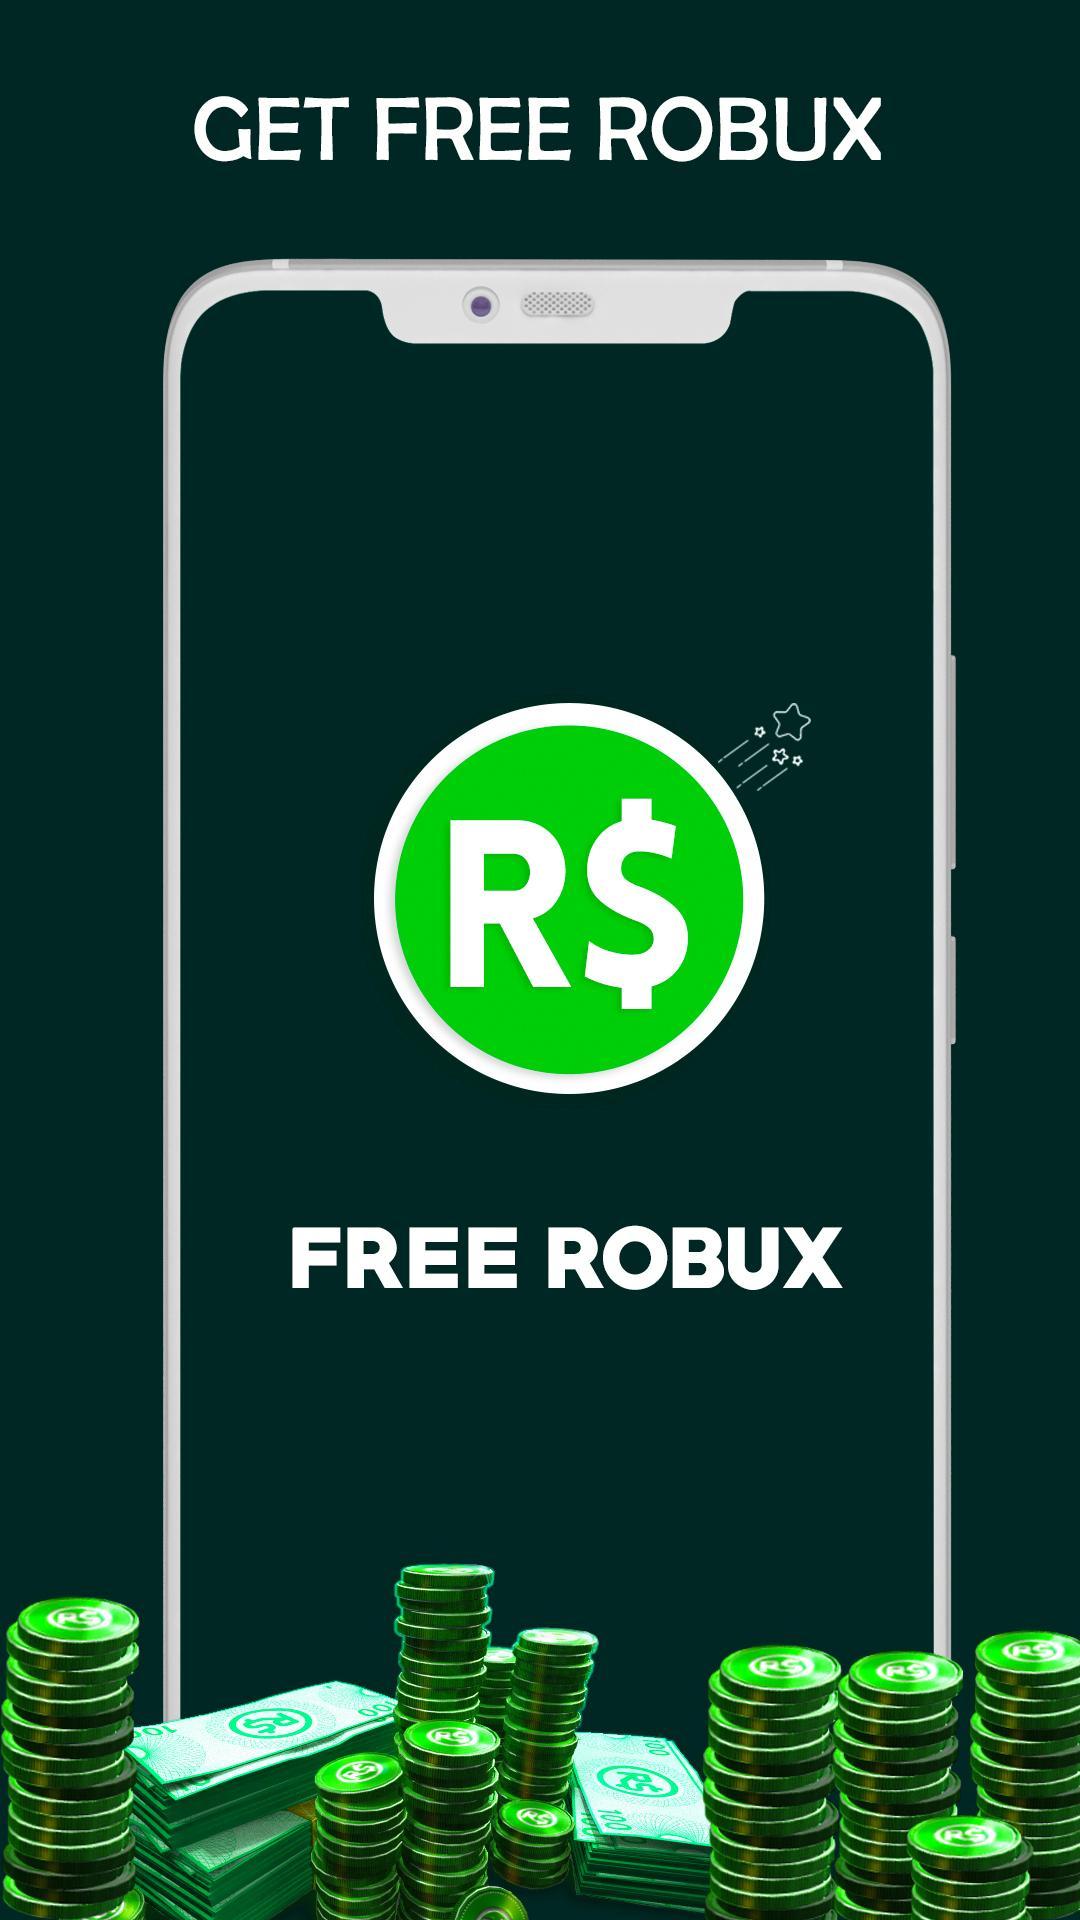 Free Robux Pro 2019 Win Daily Free Rbx For Android Apk Download